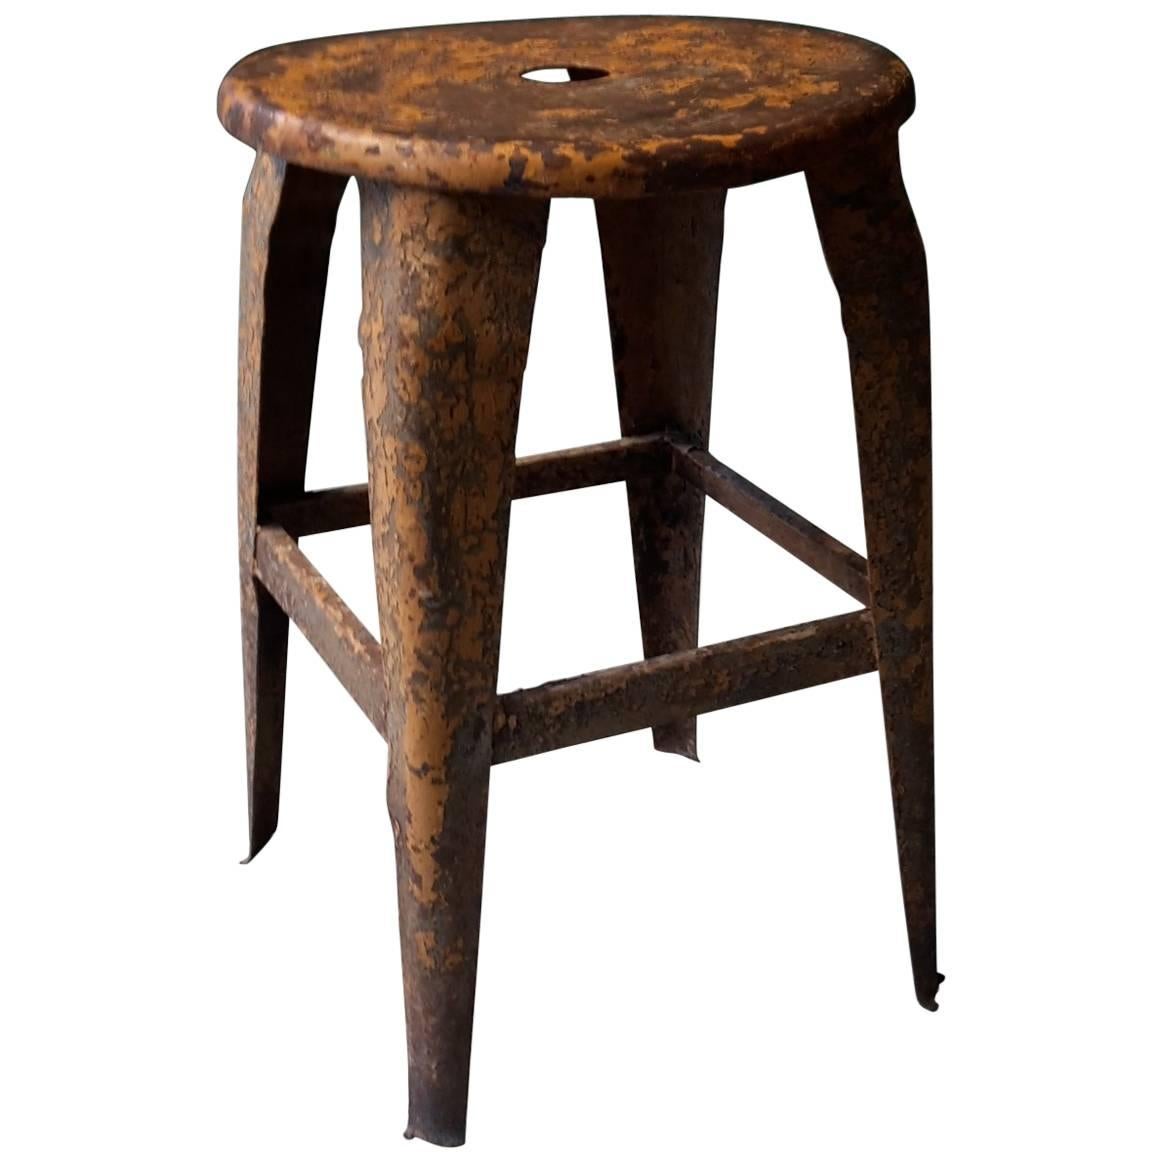 Early 20th Century French Nicolle Stool Made of Metal, 1930s For Sale